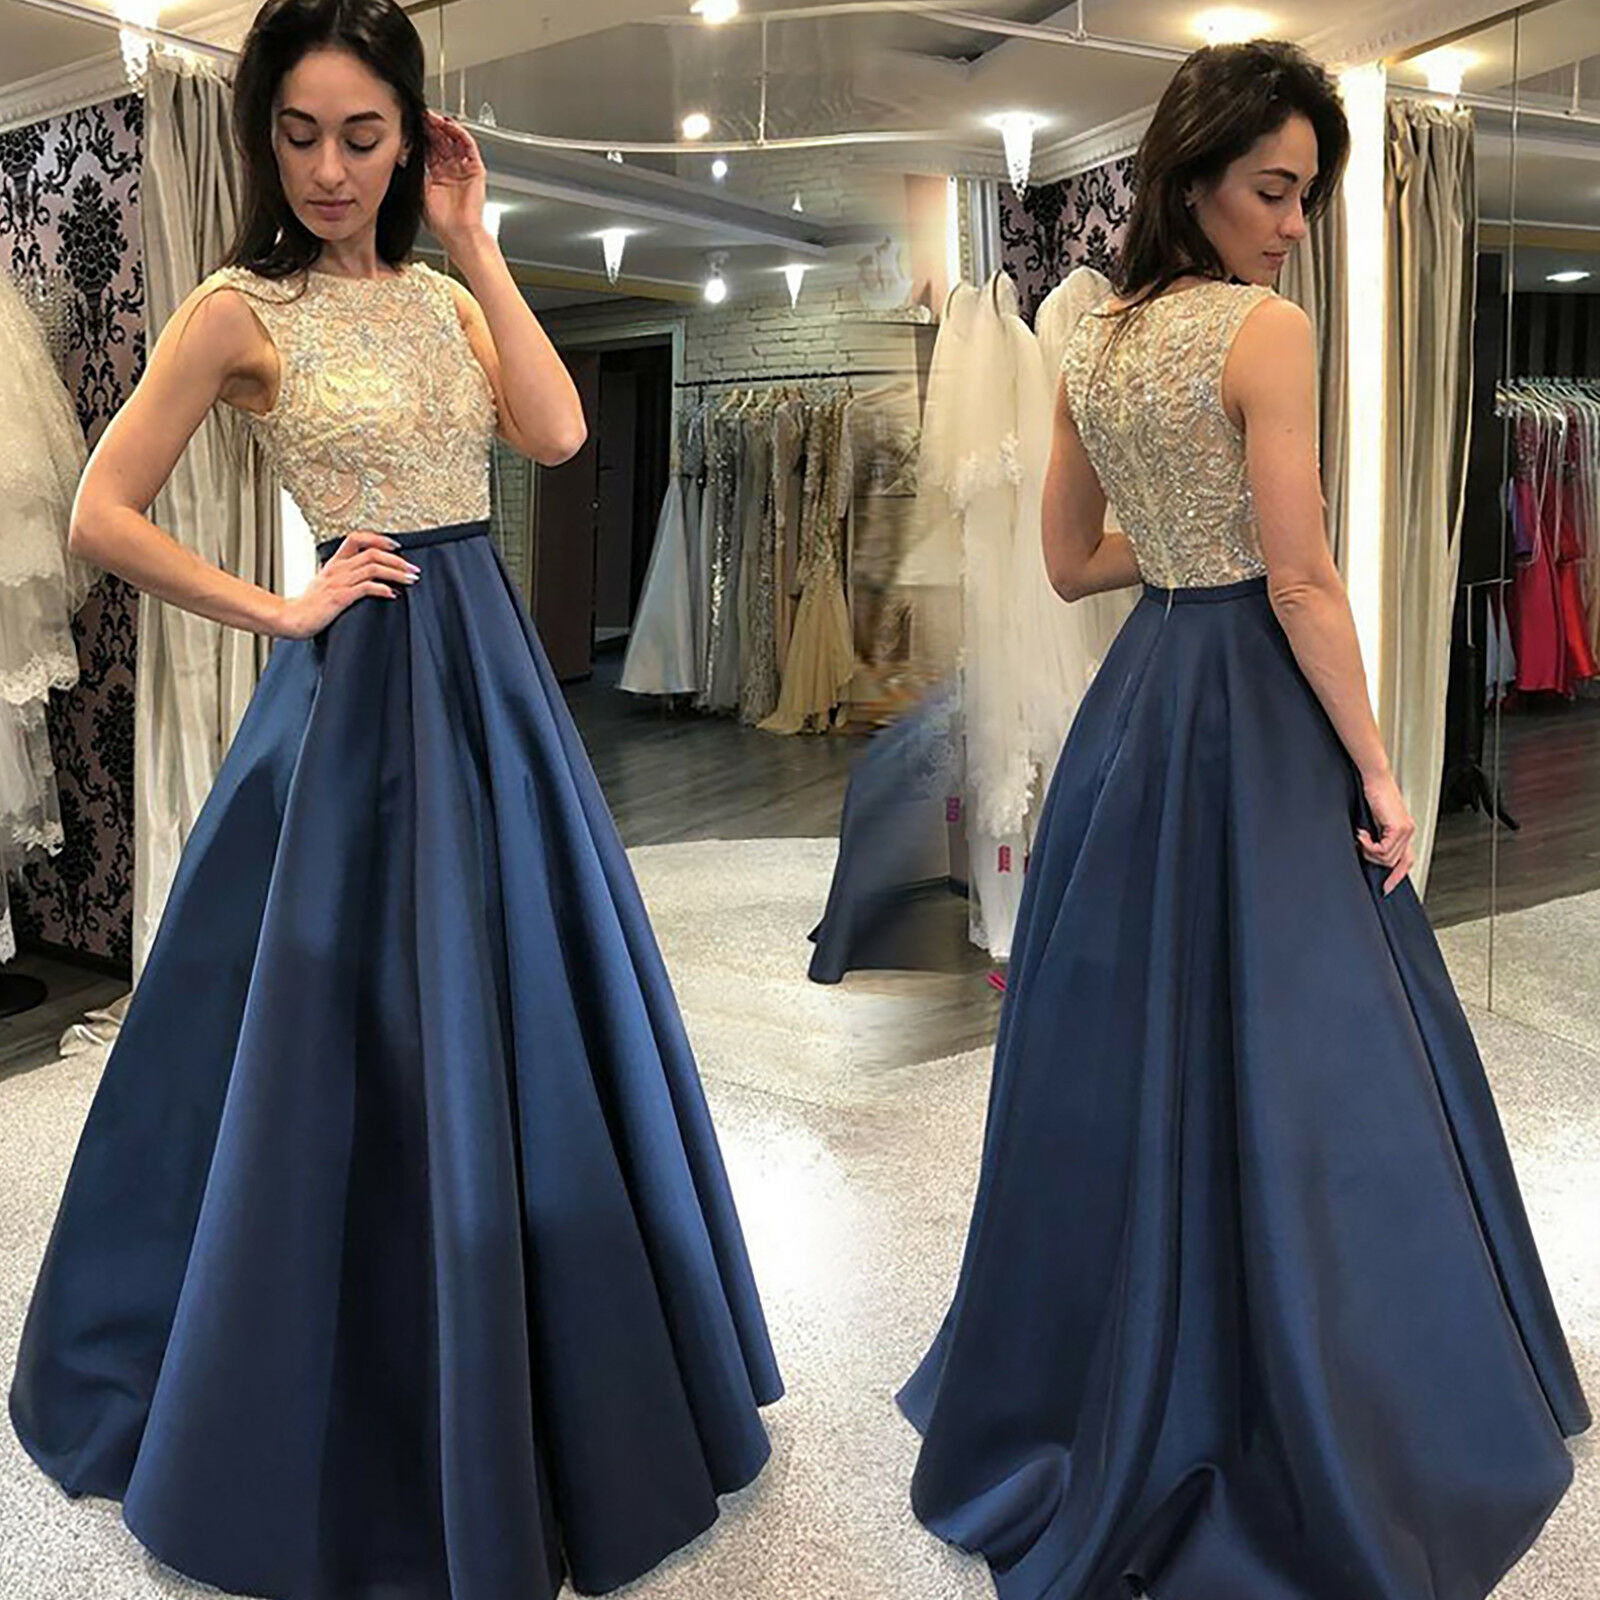 Womens Wedding Evening Dress Cocktail Ball Gown Party Prom Bridesmaid Bodycon UK 